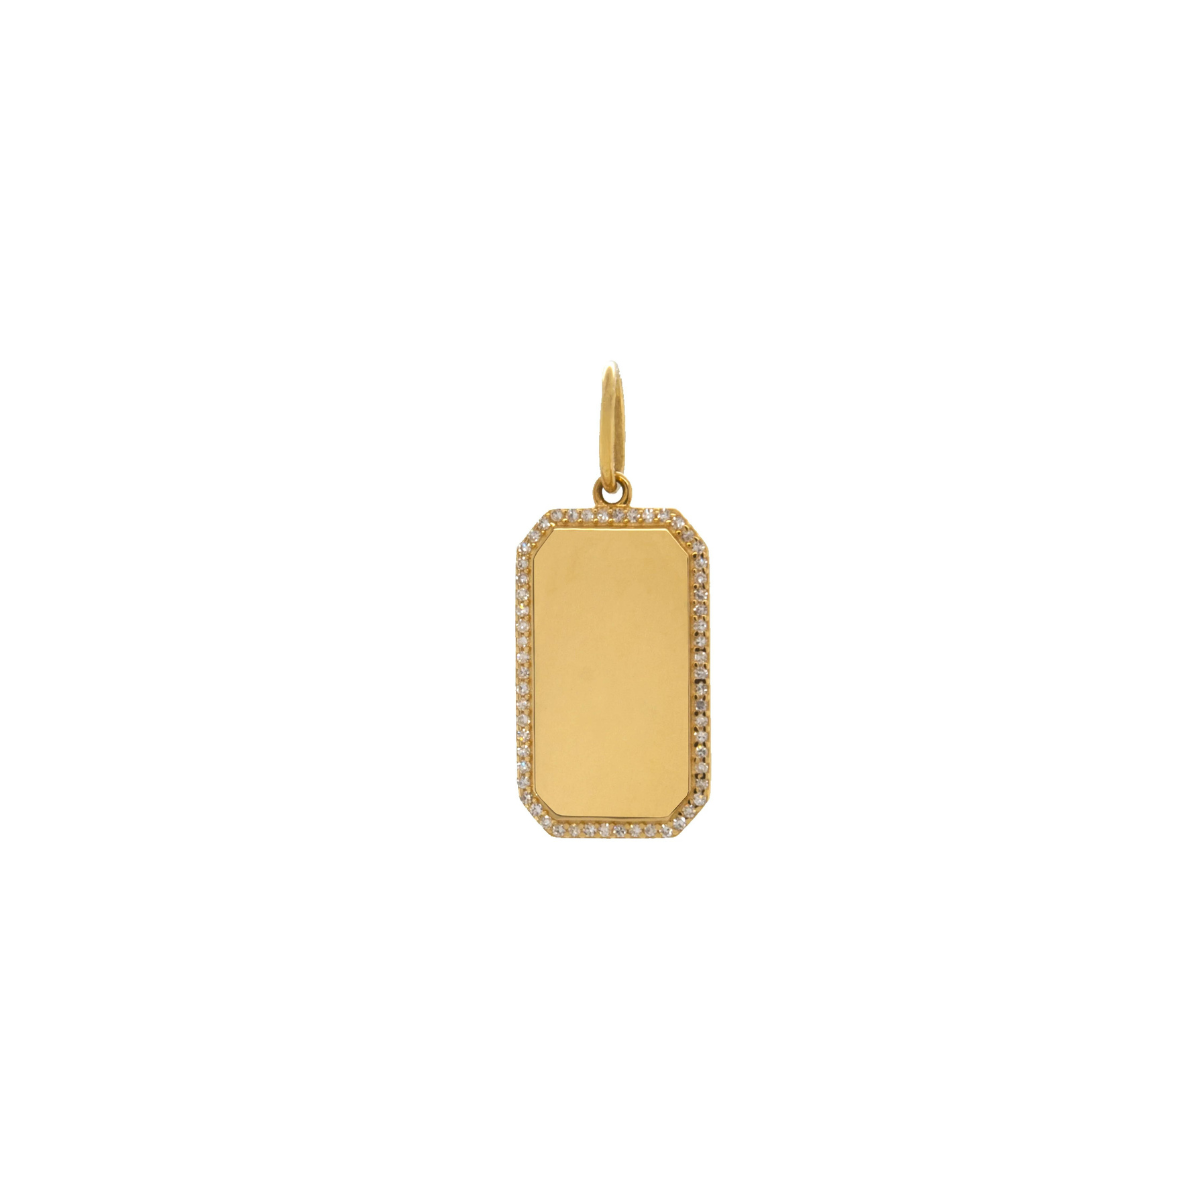 Bridget King Rectangular Dog Tag Pendant with Diamonds in Yellow Gold - Engraving Available